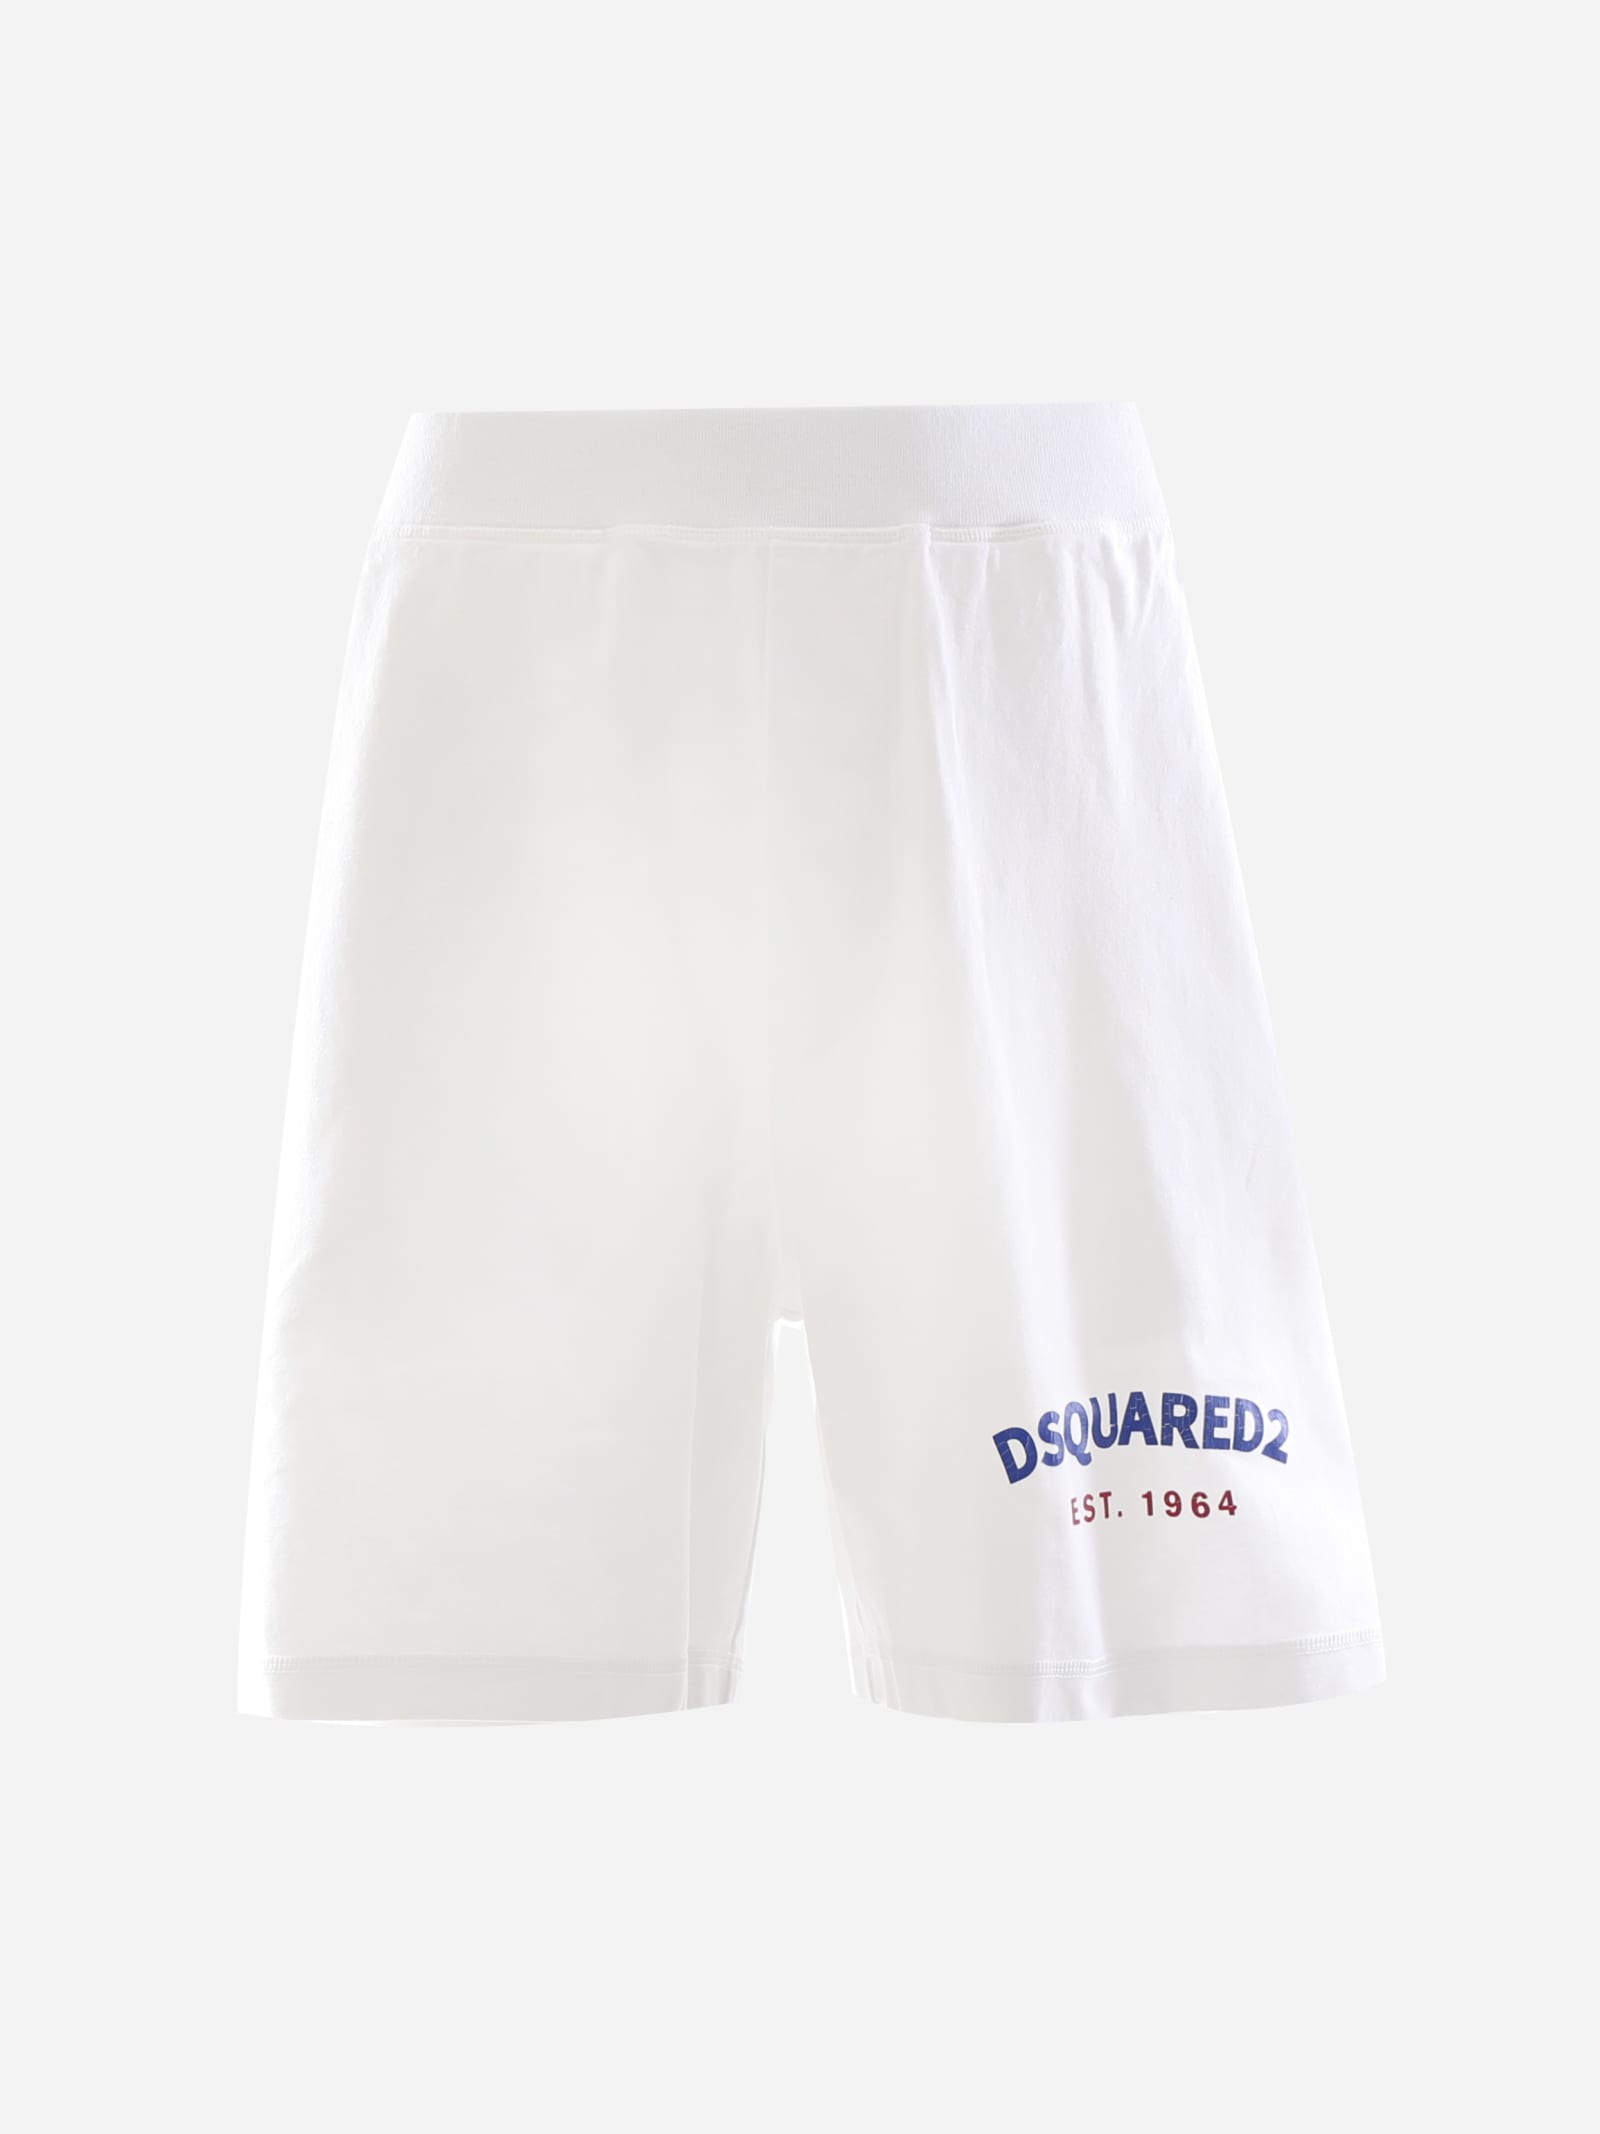 DSQUARED2 COTTON SHORTS WITH LOGO PRINT,S71MU0622 S23851100